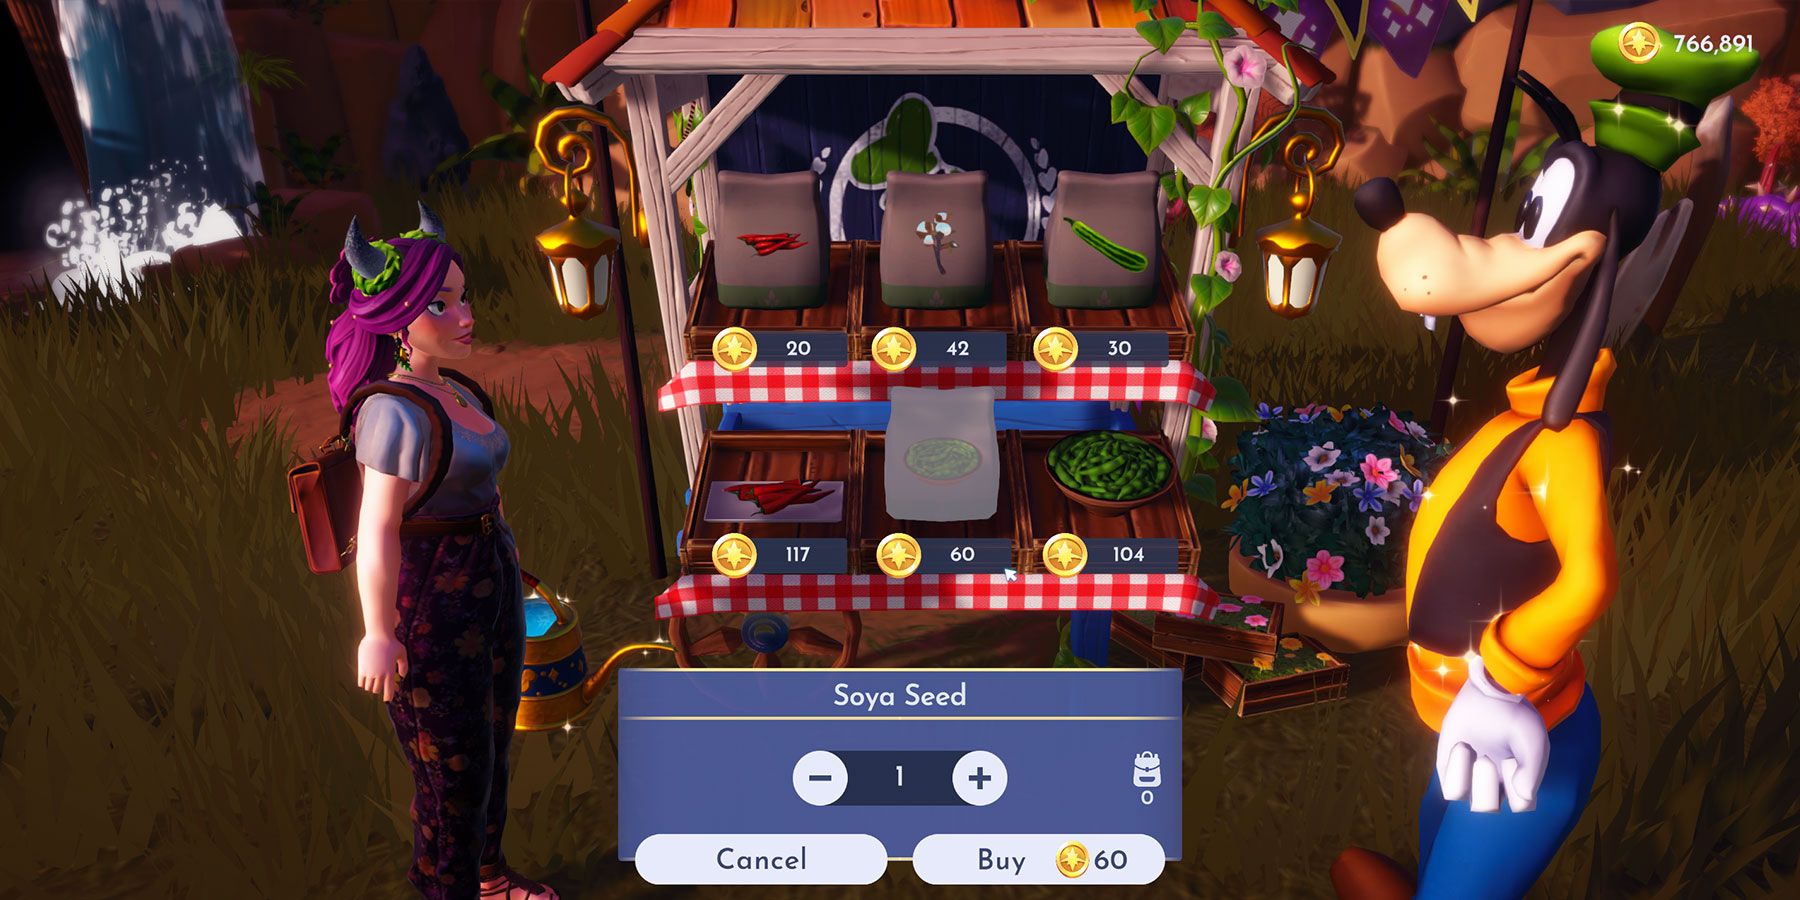 buying soya seeds from goofy's stall 